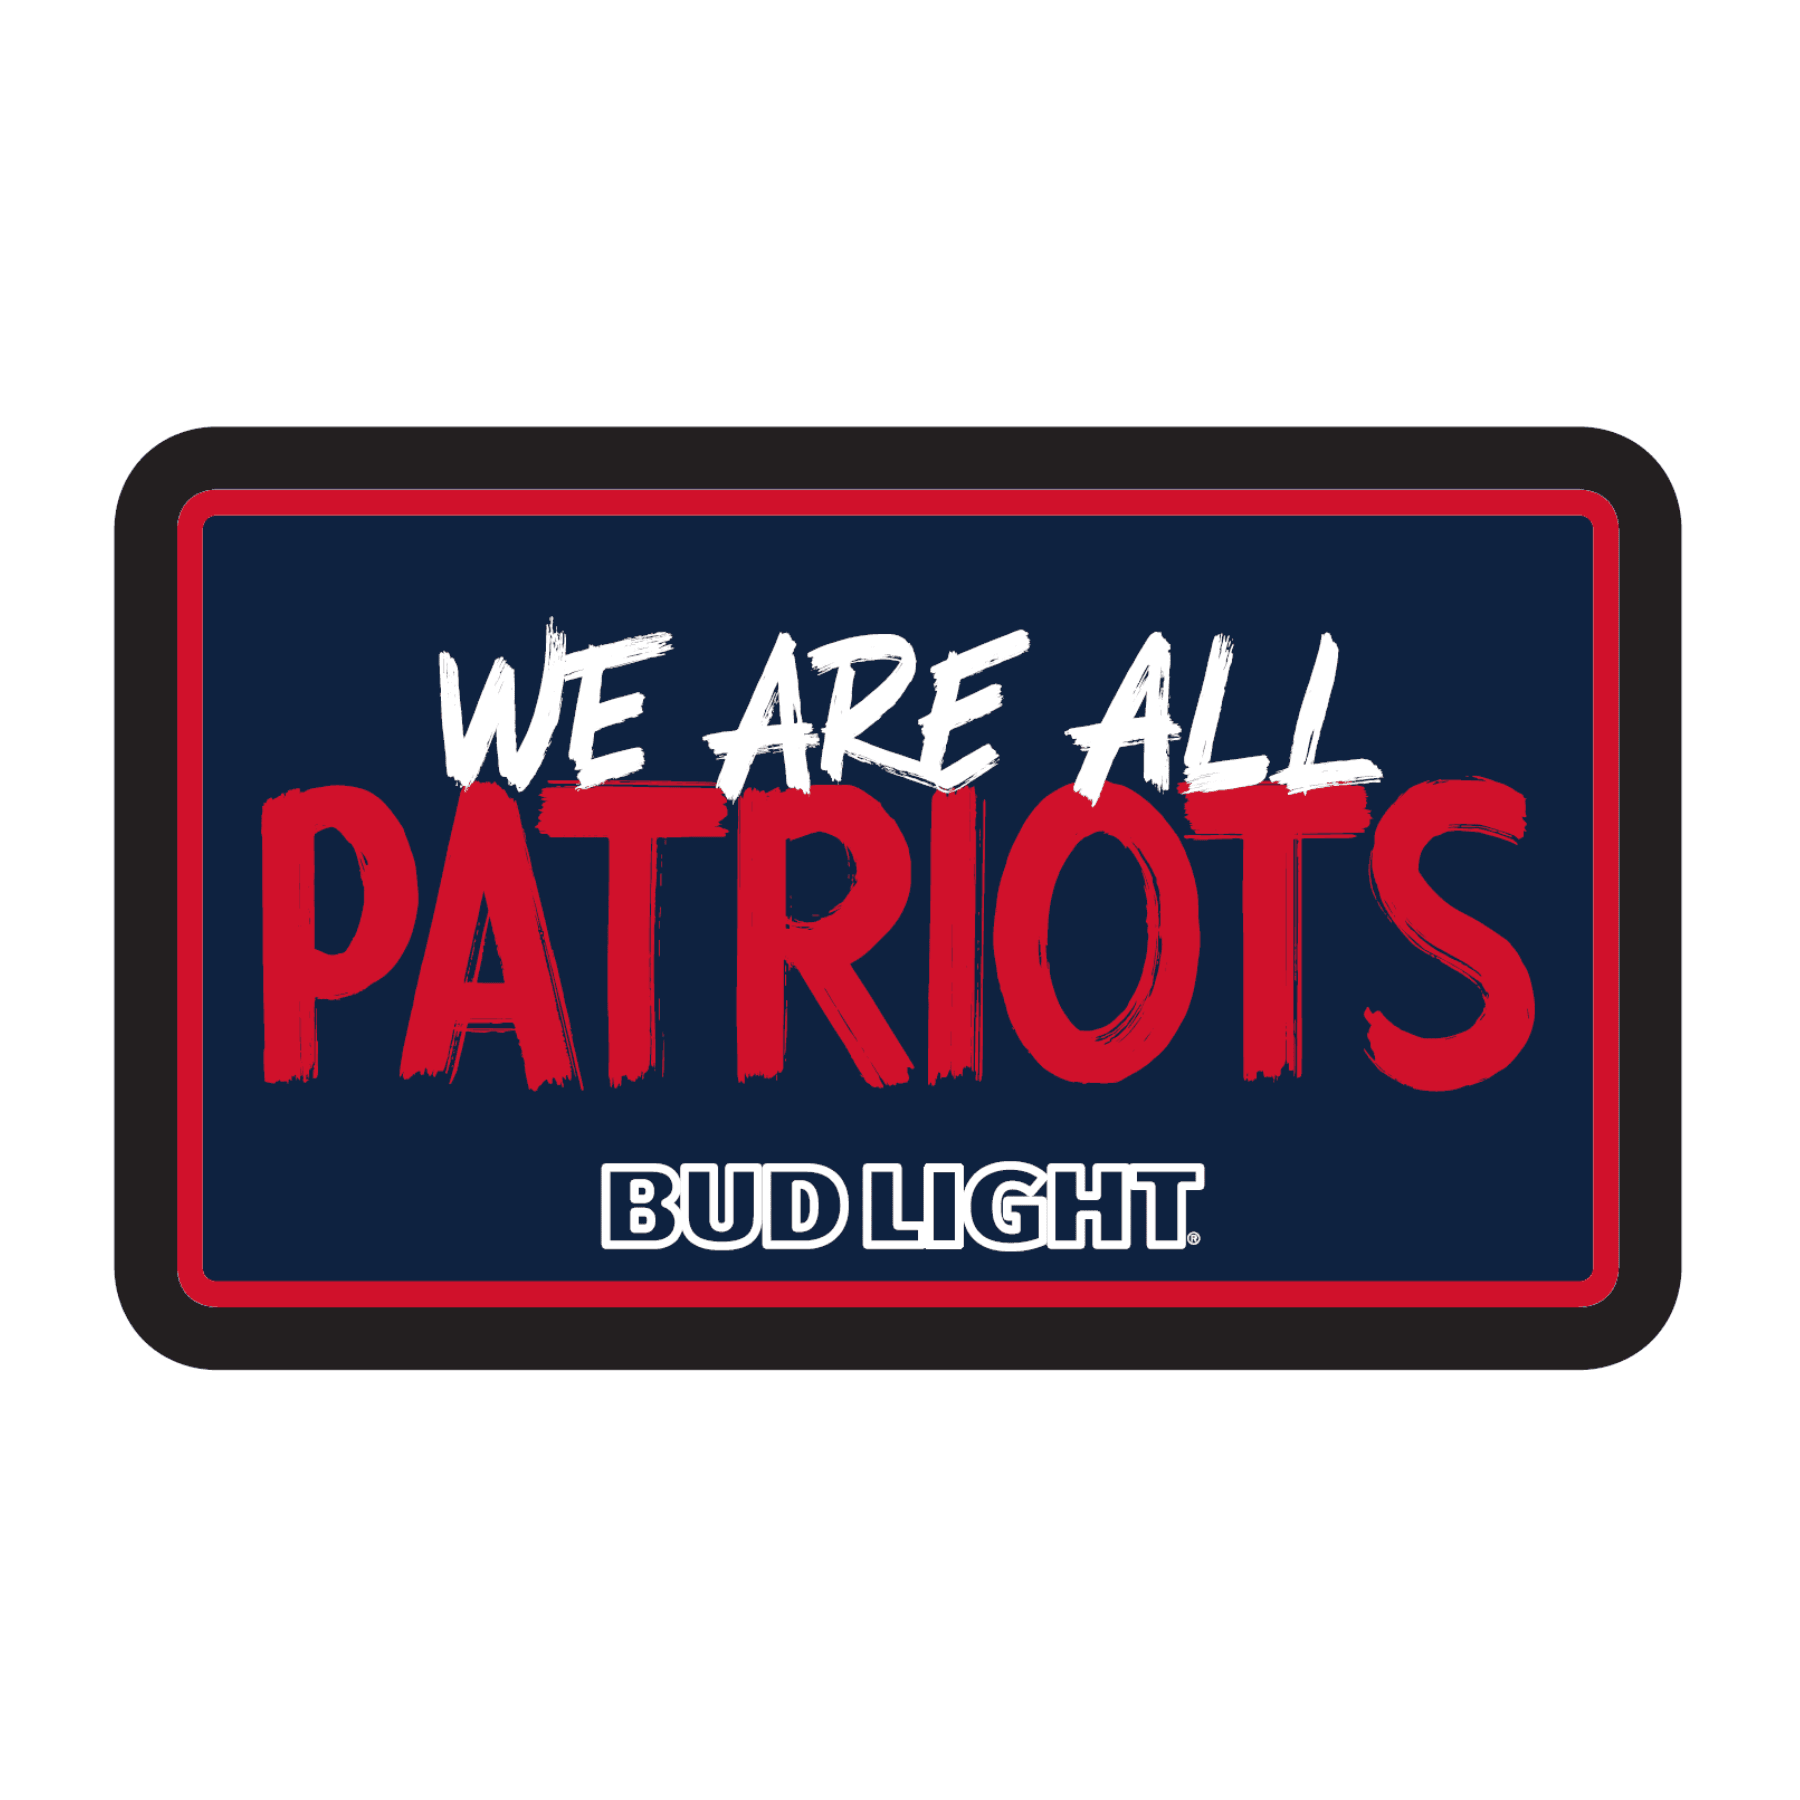 Bud Light New England Patriots "We Are All Patriots" LED Sign